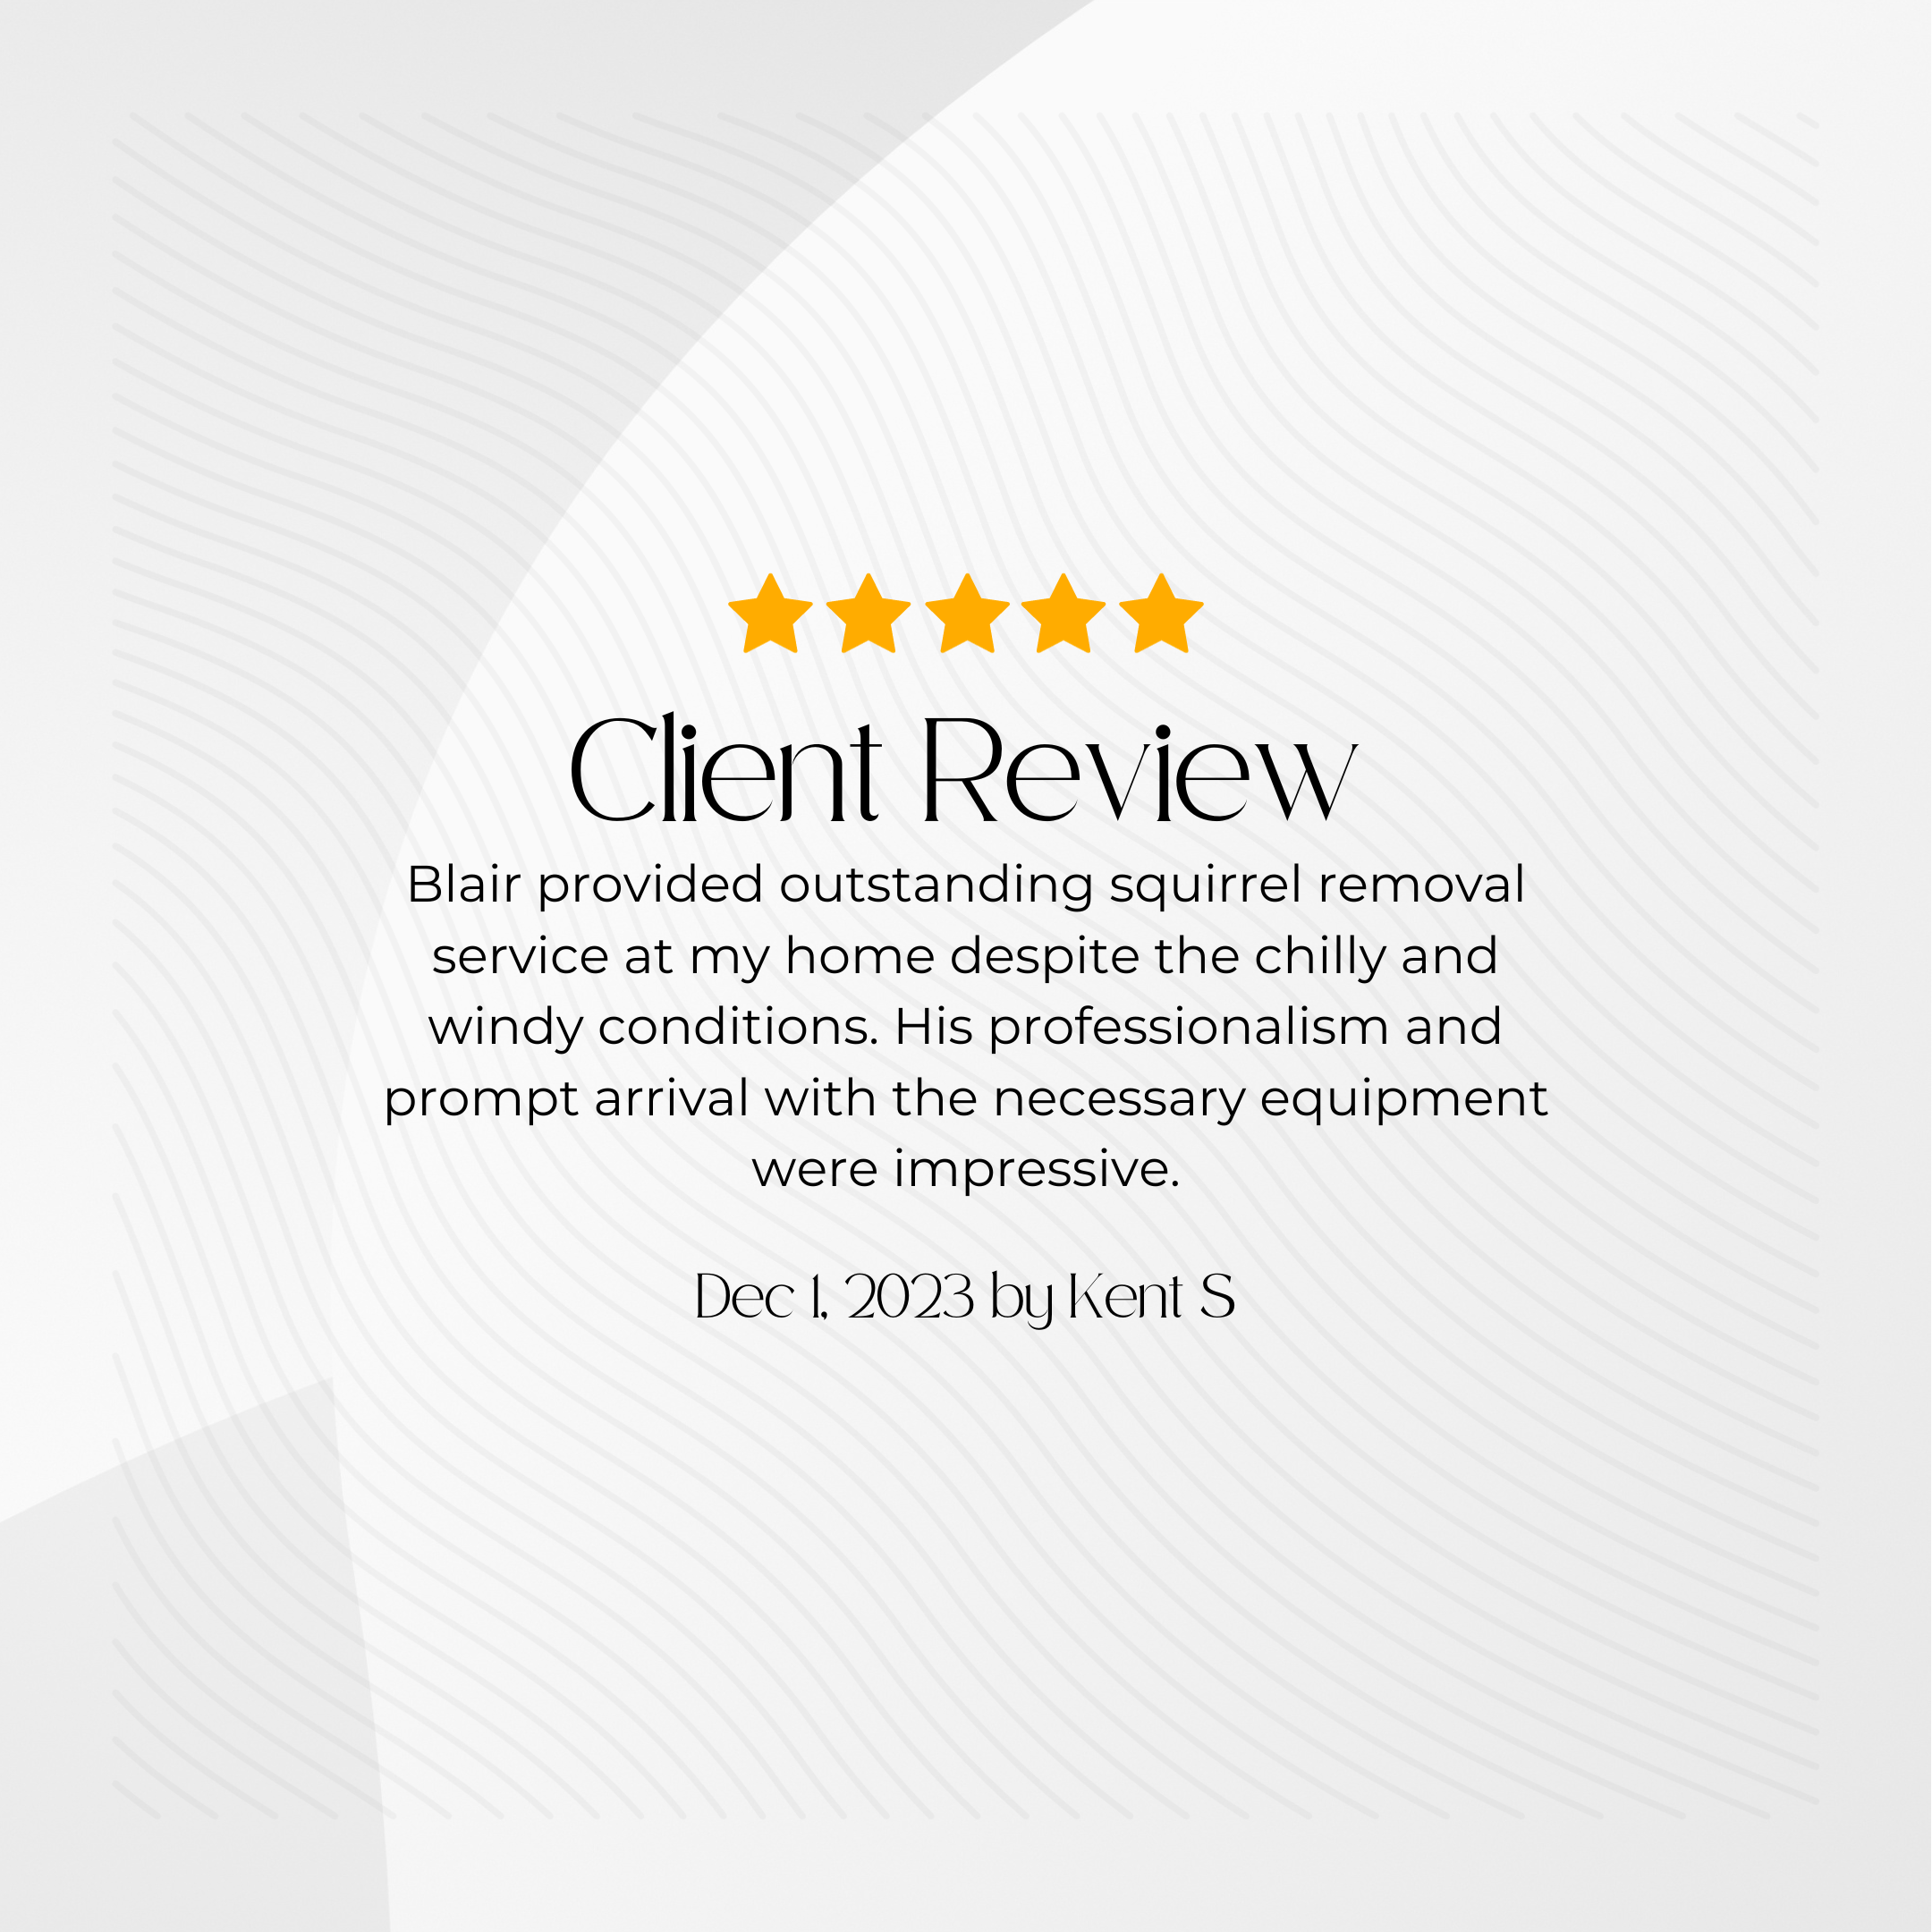 Client Review Testimonial Squirrel Removal Review